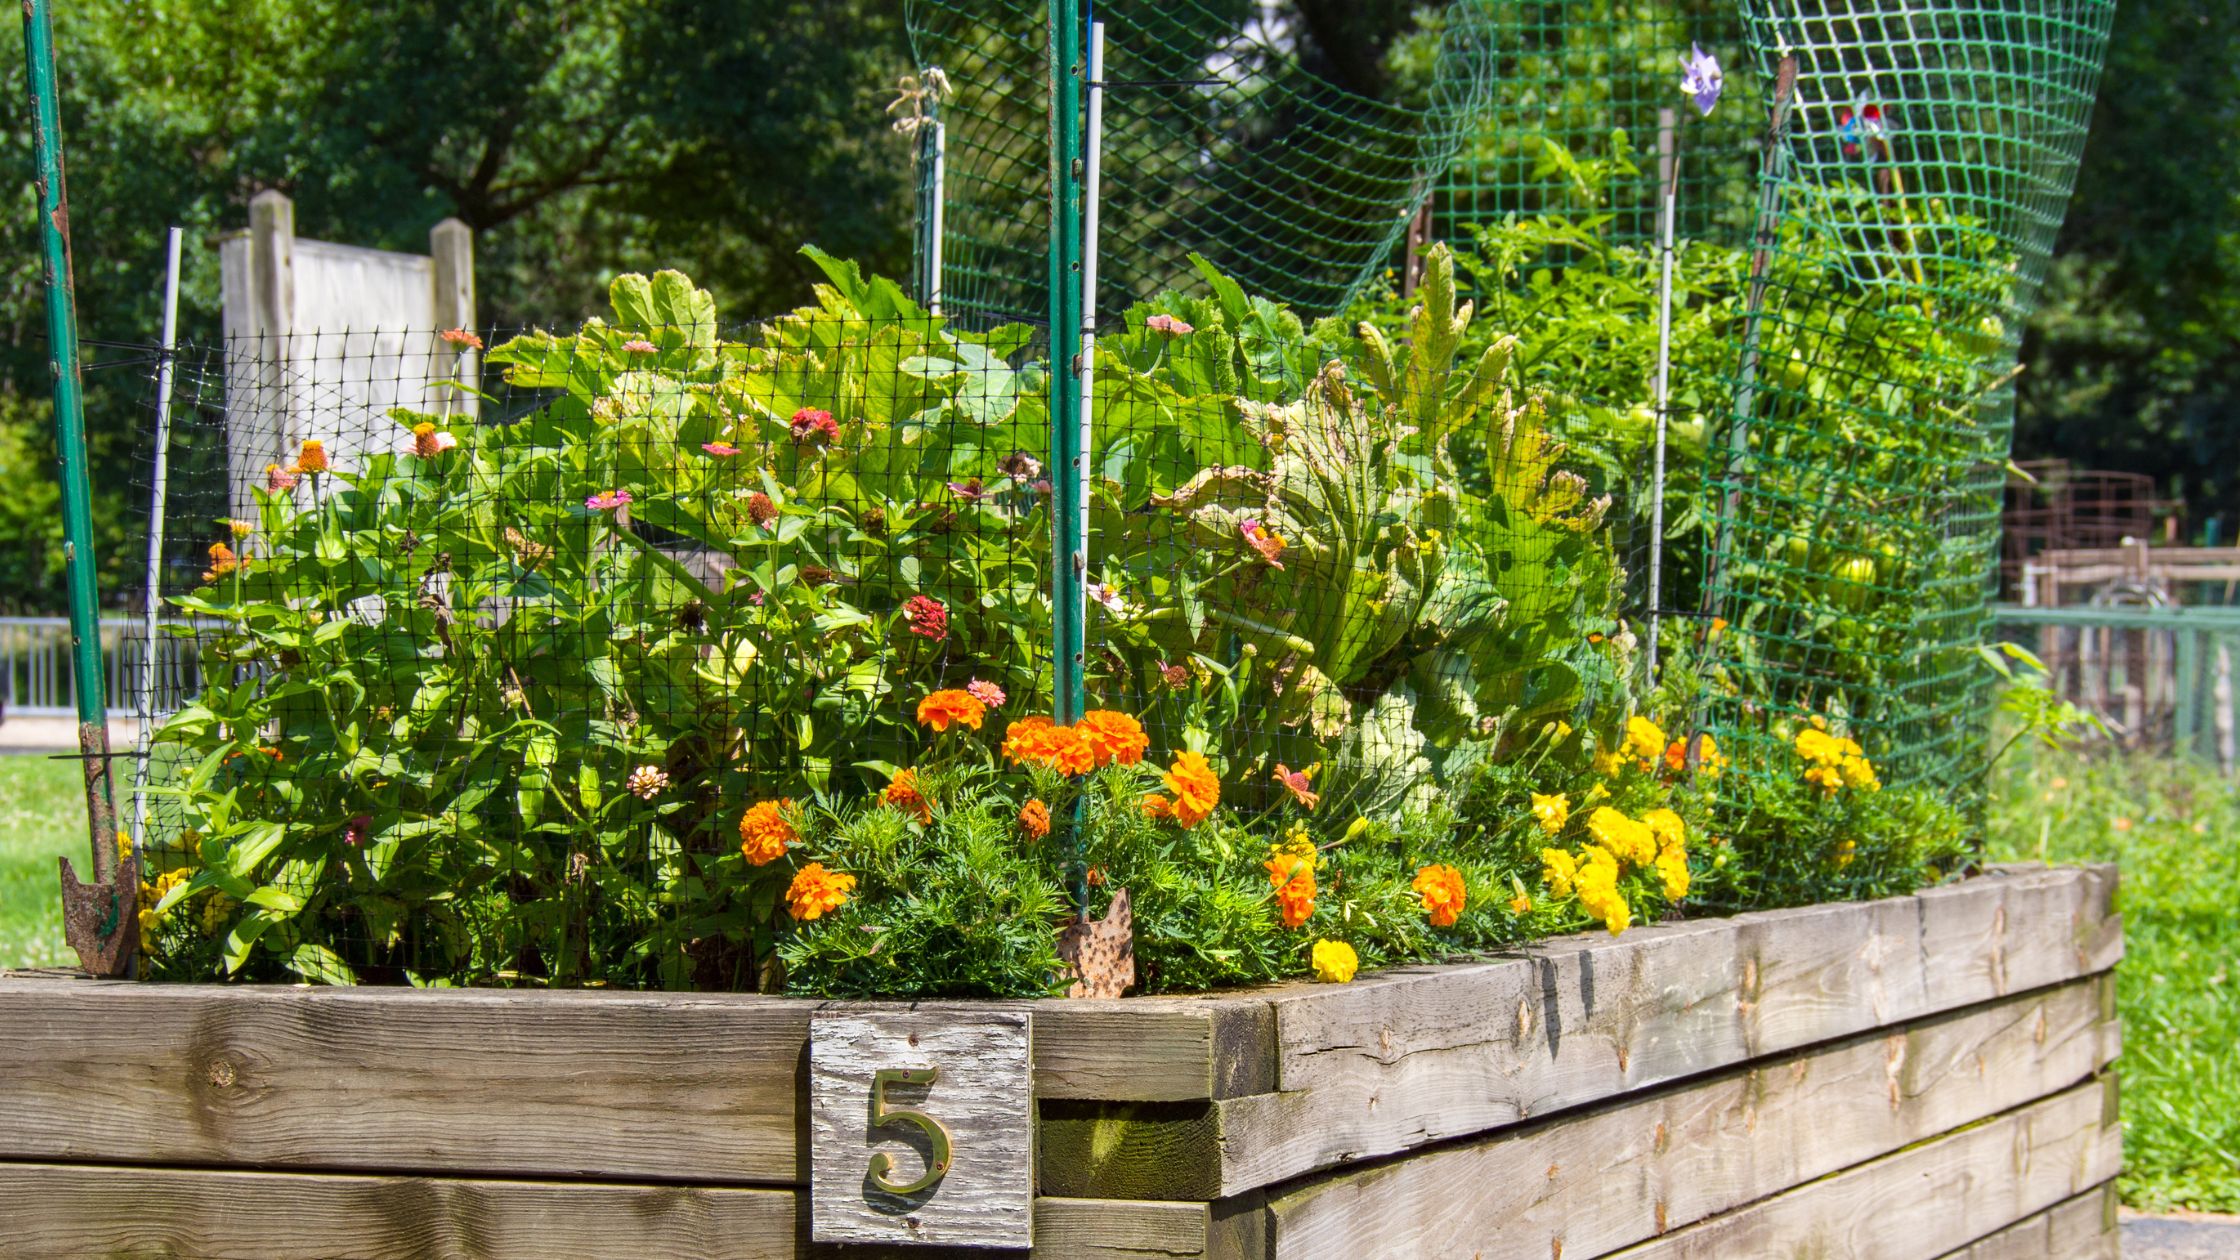 marigolds and foliage in a raised bed